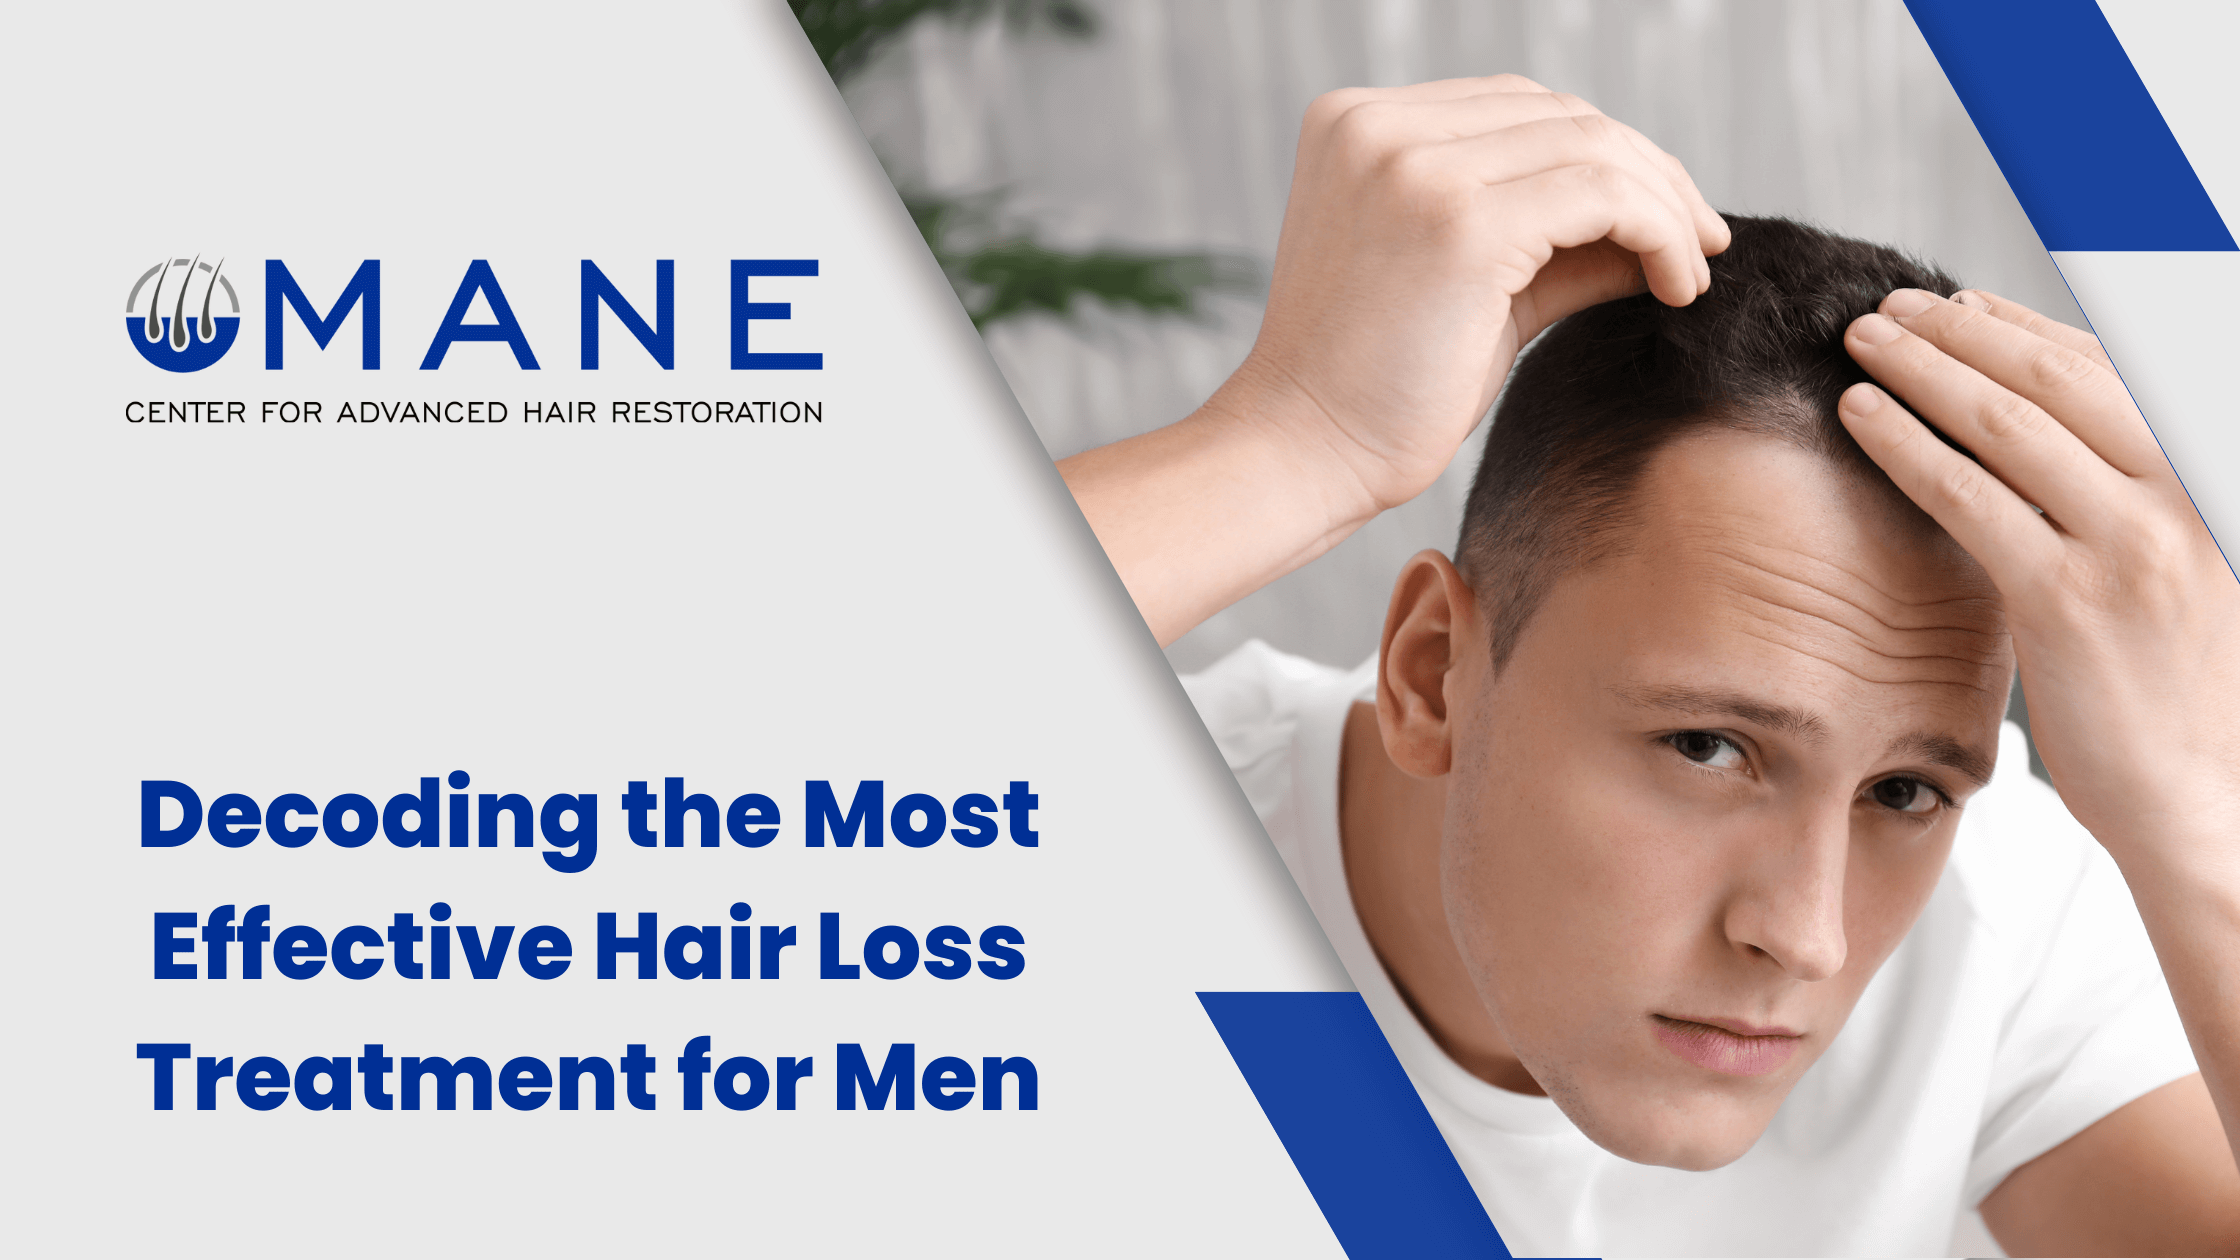 Decoding the Most Effective Hair Loss Treatment for Men